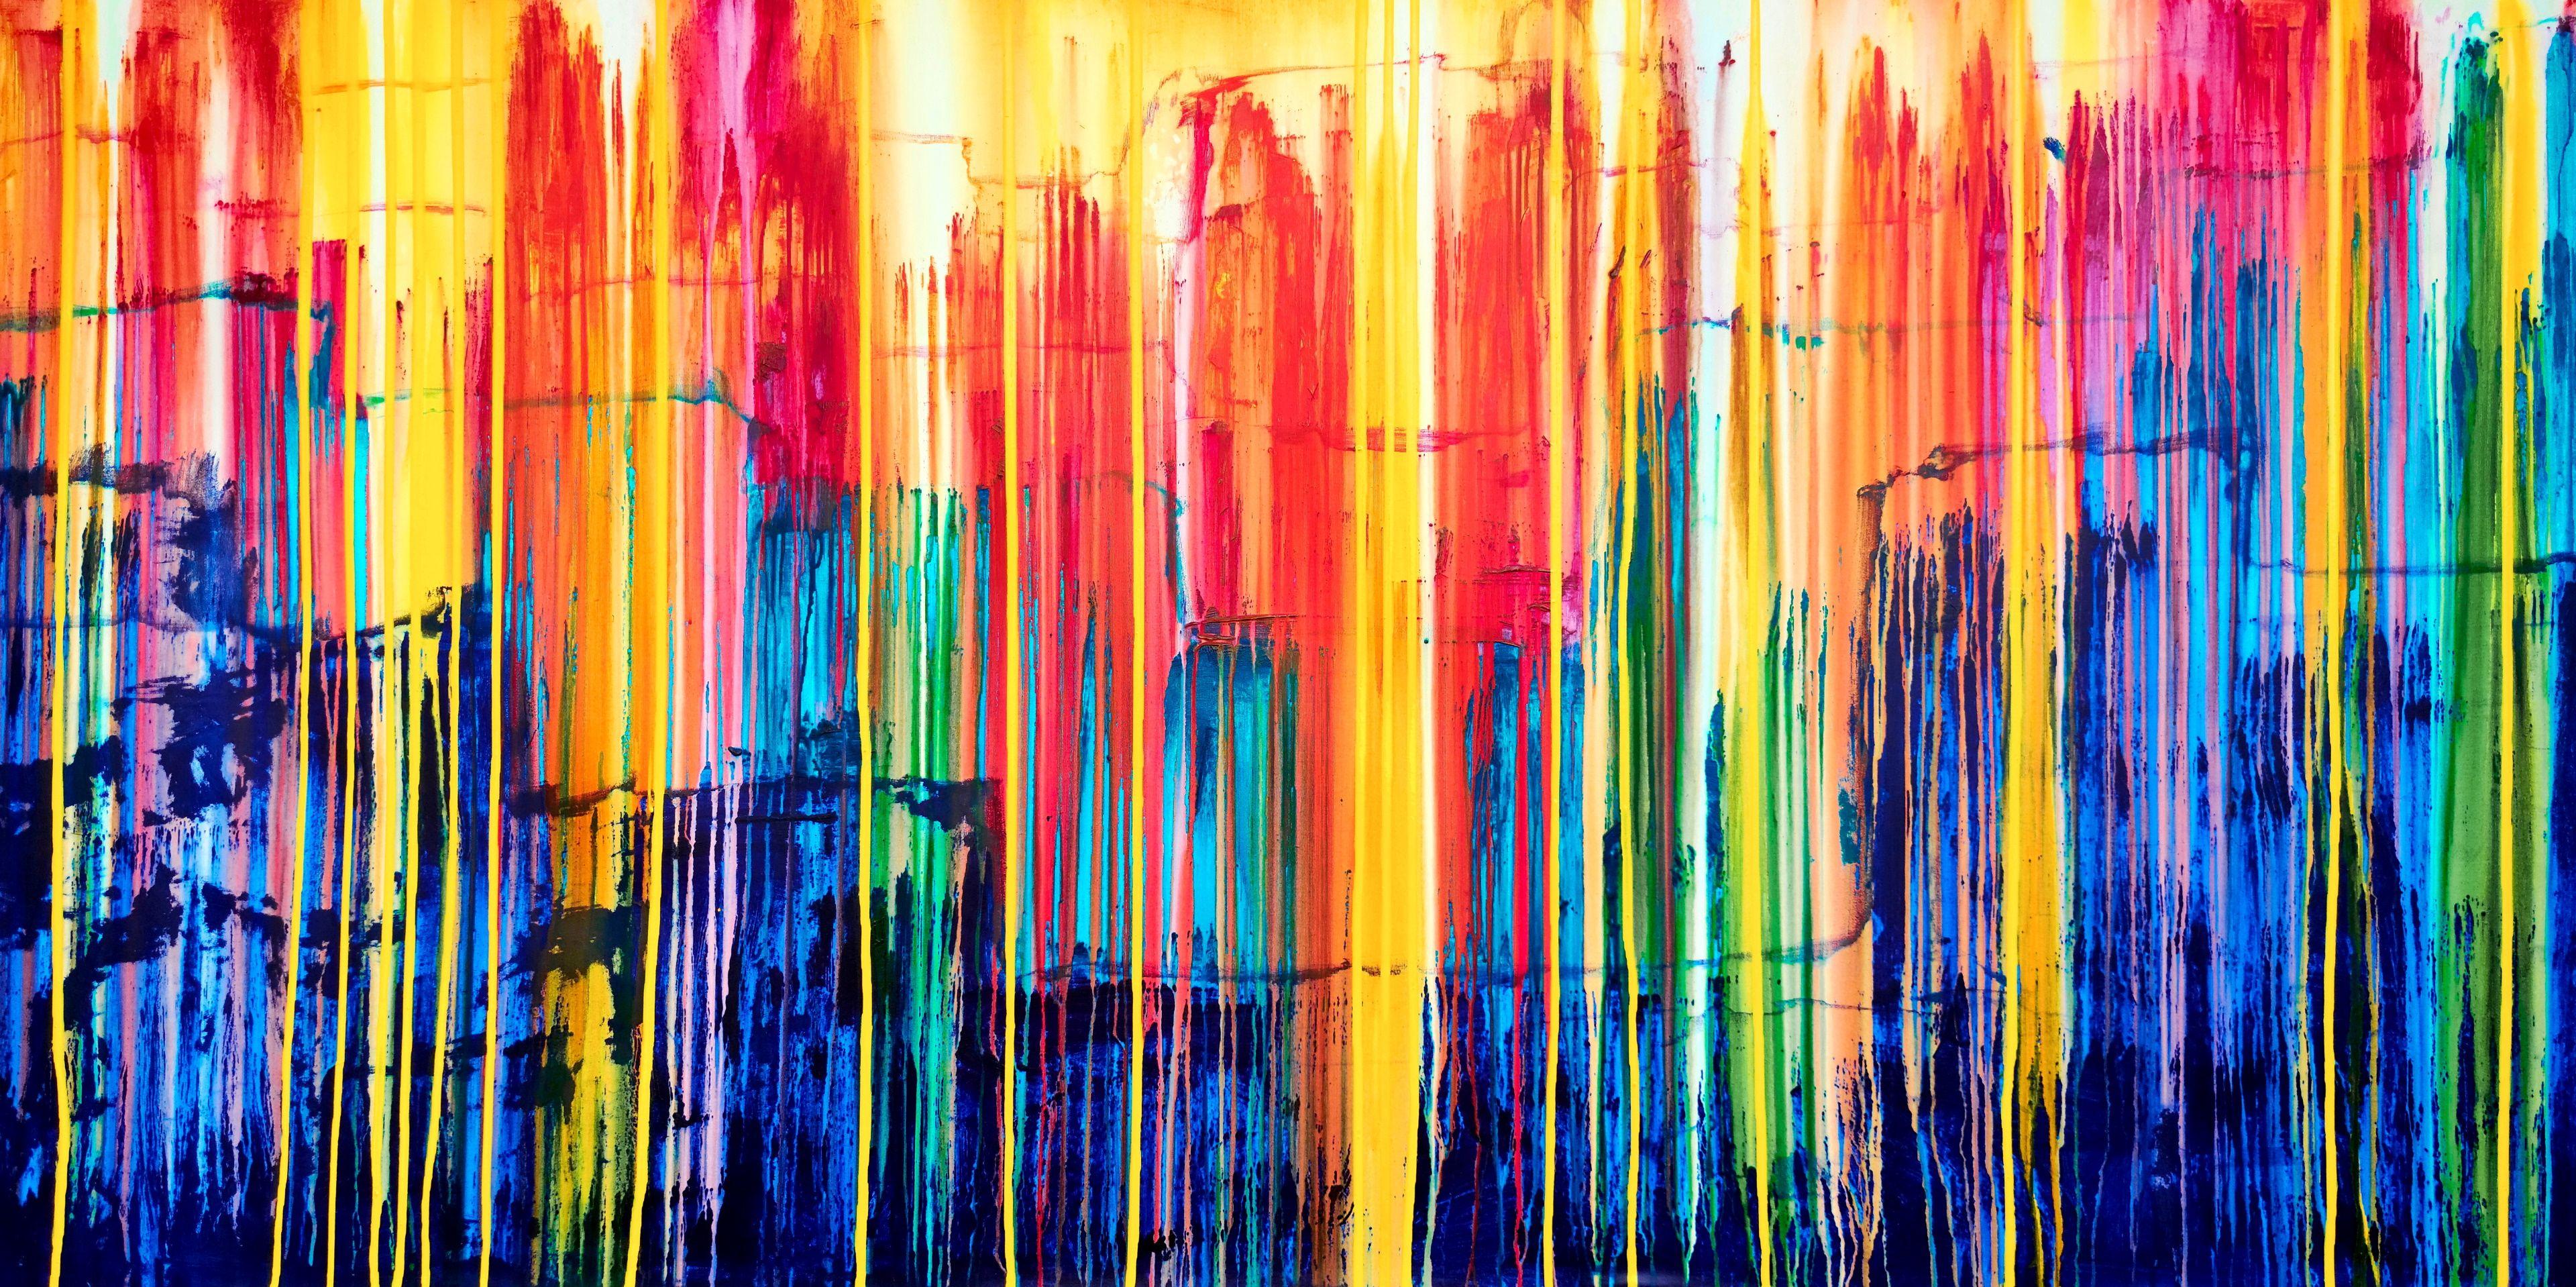 Carla Sá Fernandes Abstract Painting - The Emotional Creation #329, Painting, Acrylic on Canvas